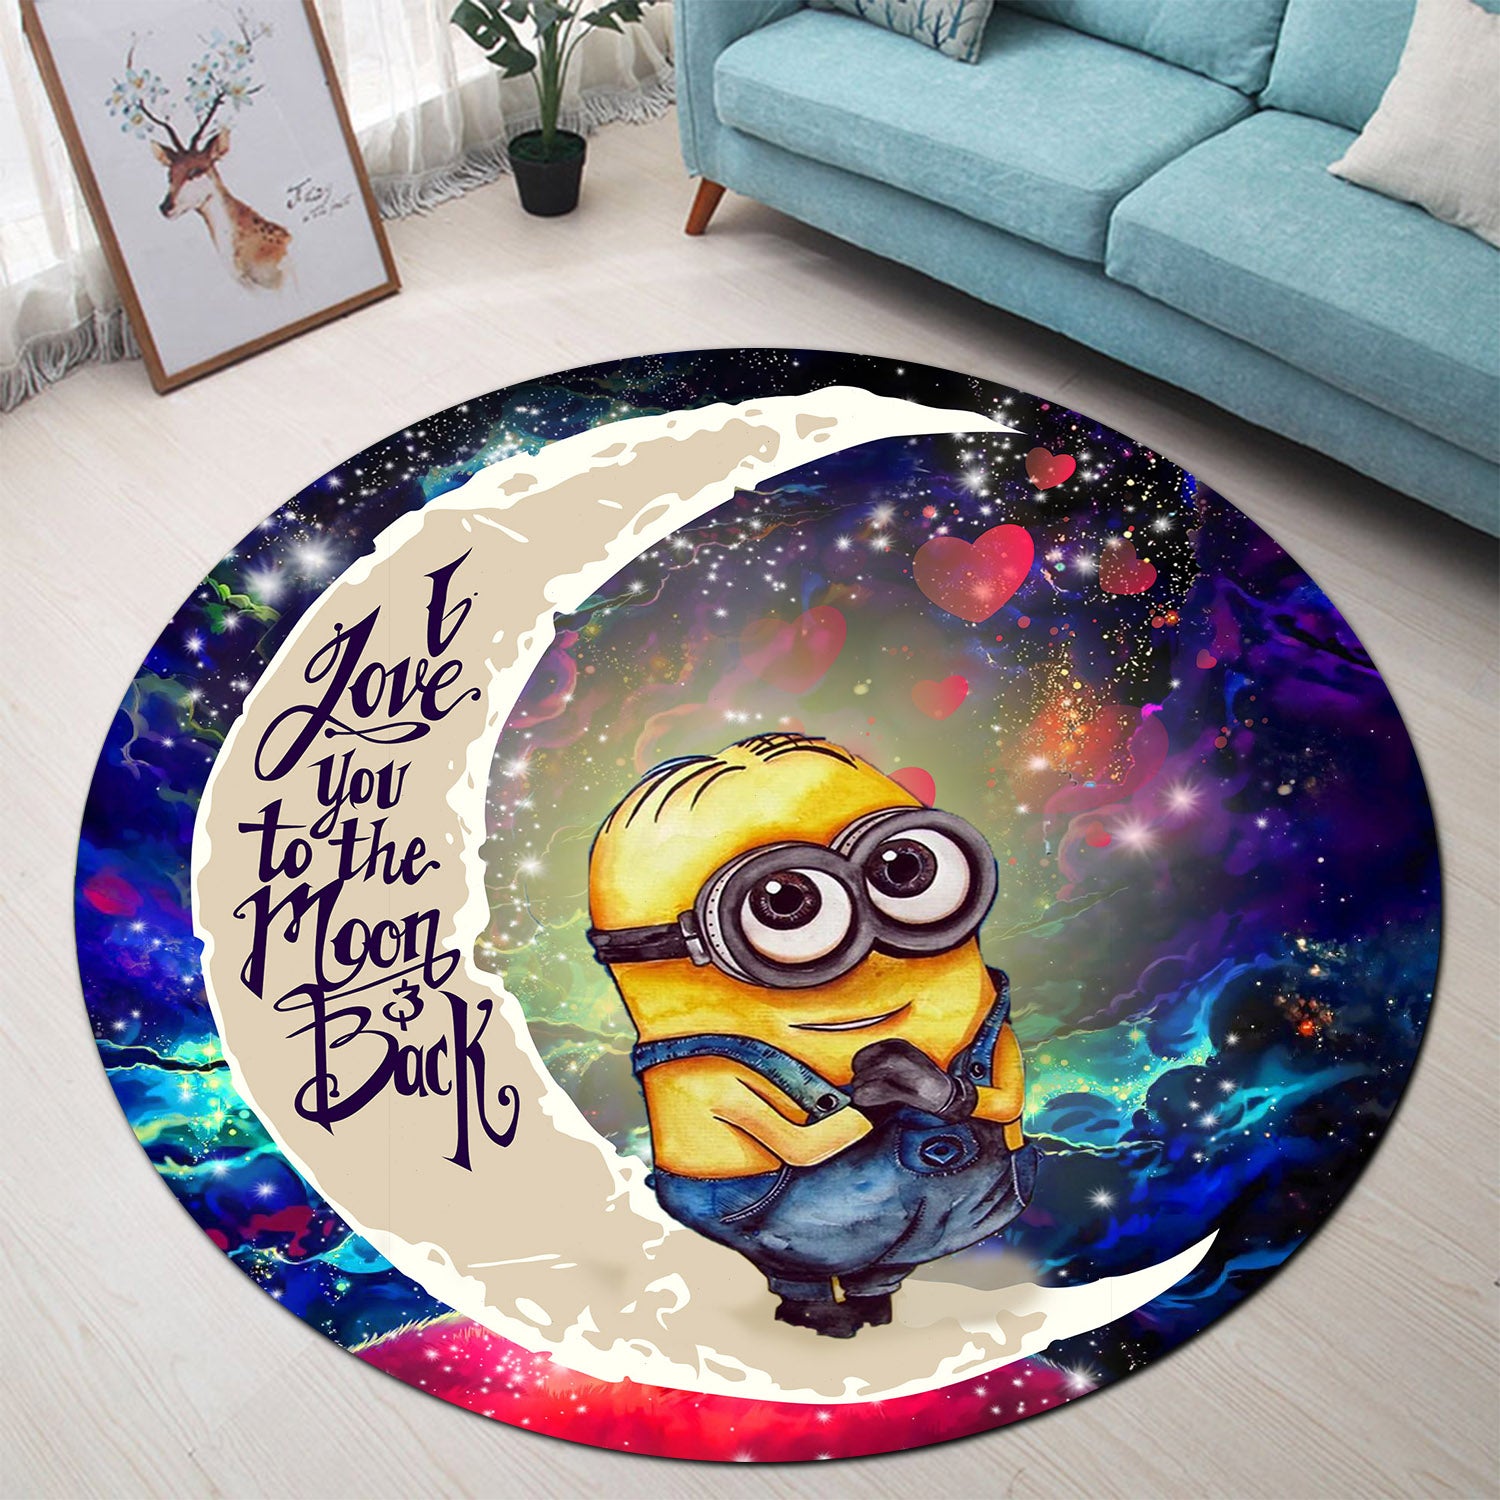 Cute Minions Despicable Me Love You To The Moon Galaxy Round Carpet Rug Bedroom Livingroom Home Decor Nearkii